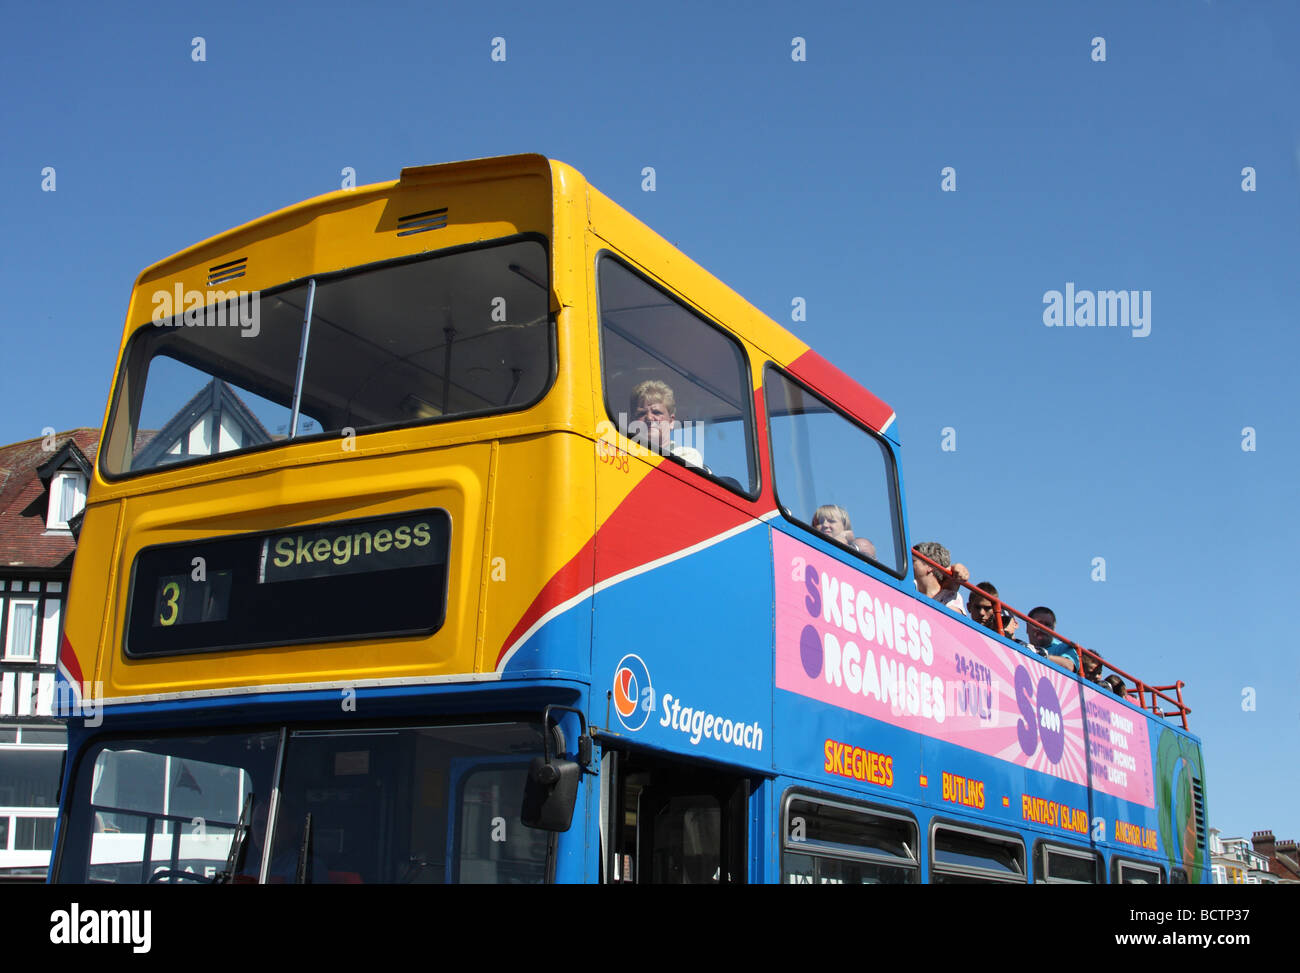 Ein open-Top-Tour-Bus in Skegness, Lincolnshire, England, U.K Stockfoto